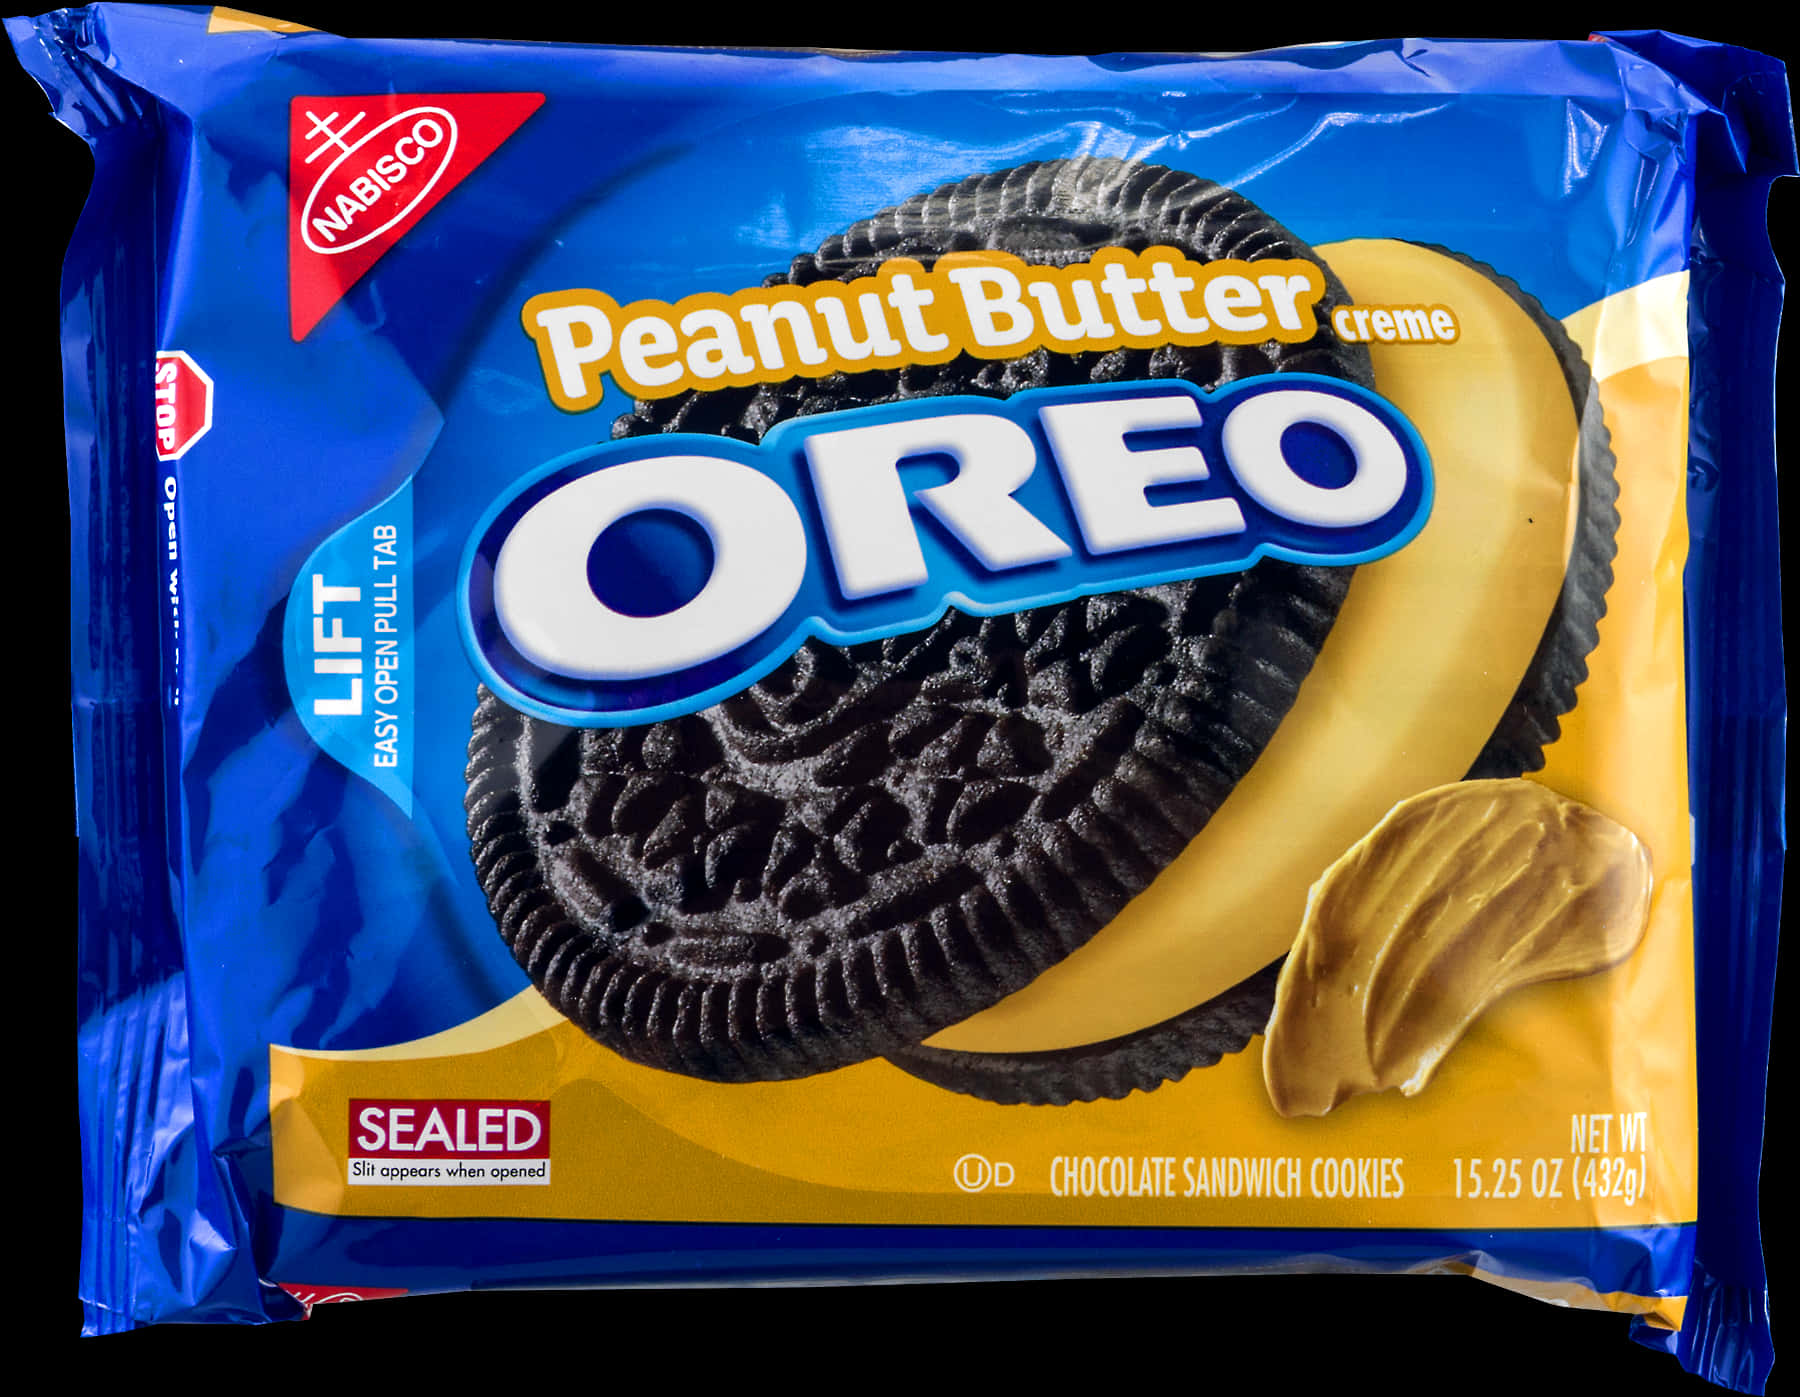 Peanut Butter Creme Oreo Package